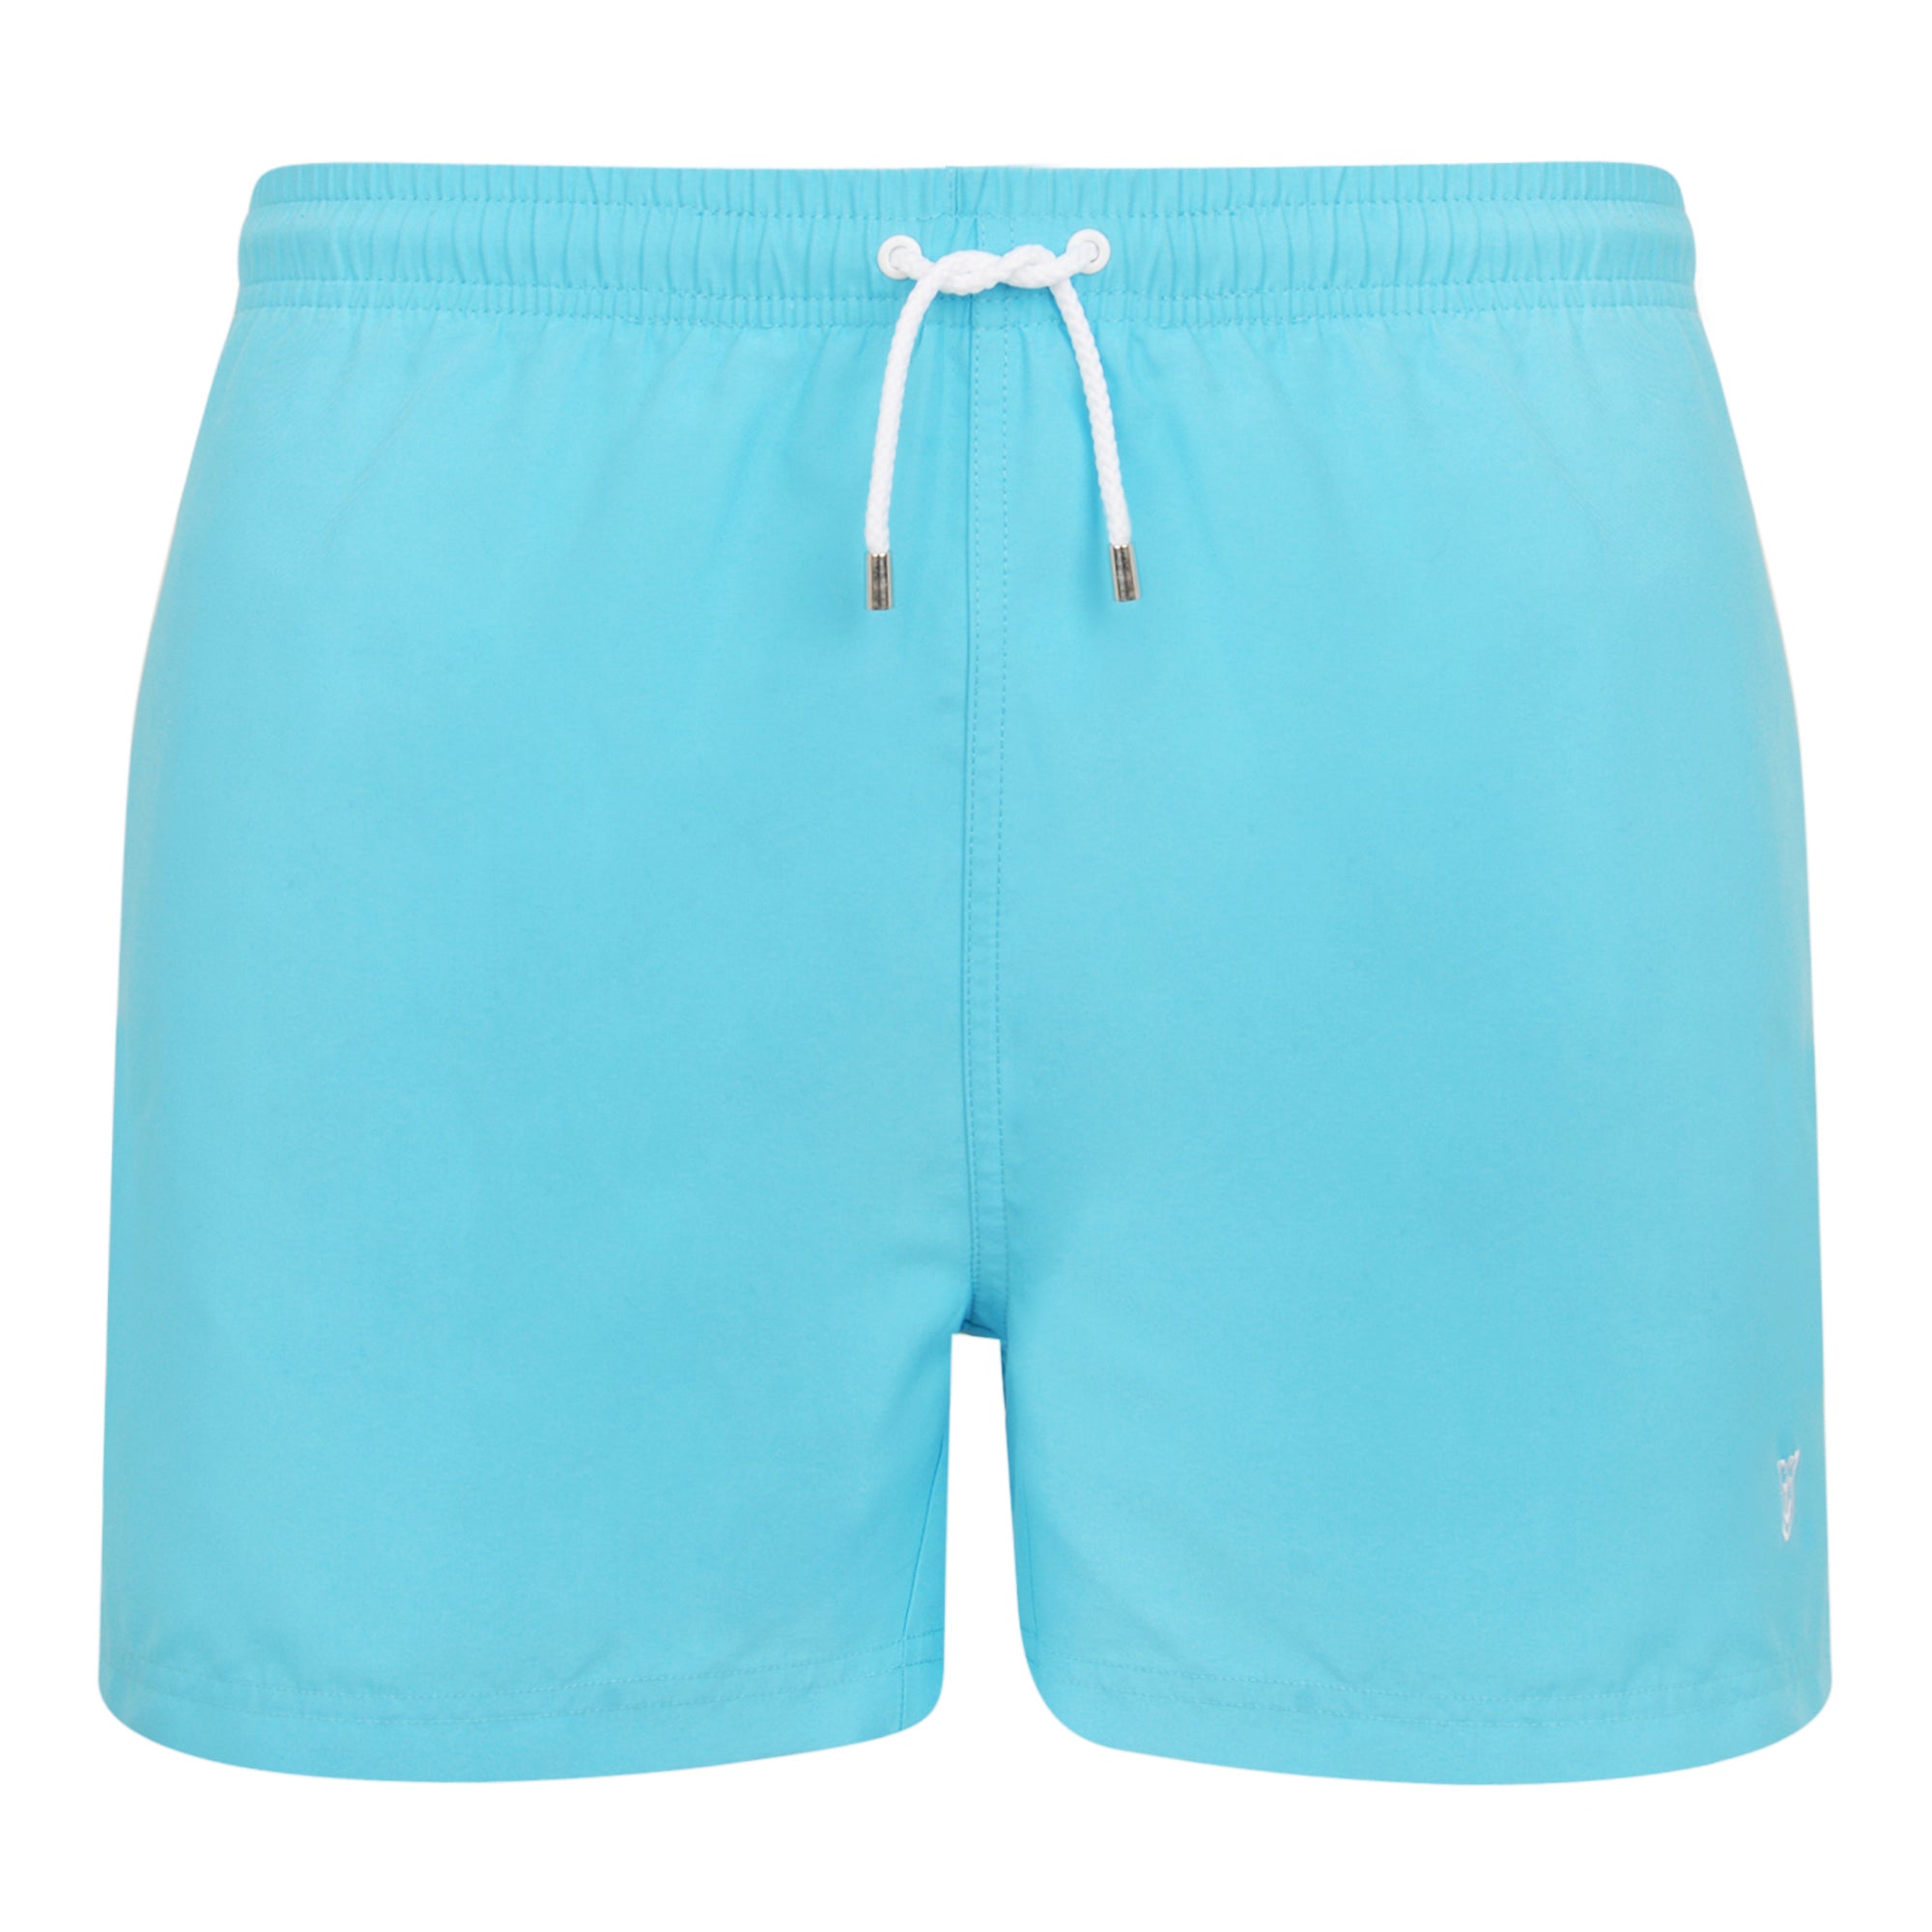 Swim shorts with mesh lining, TURQUOISE color. With travel pouch!